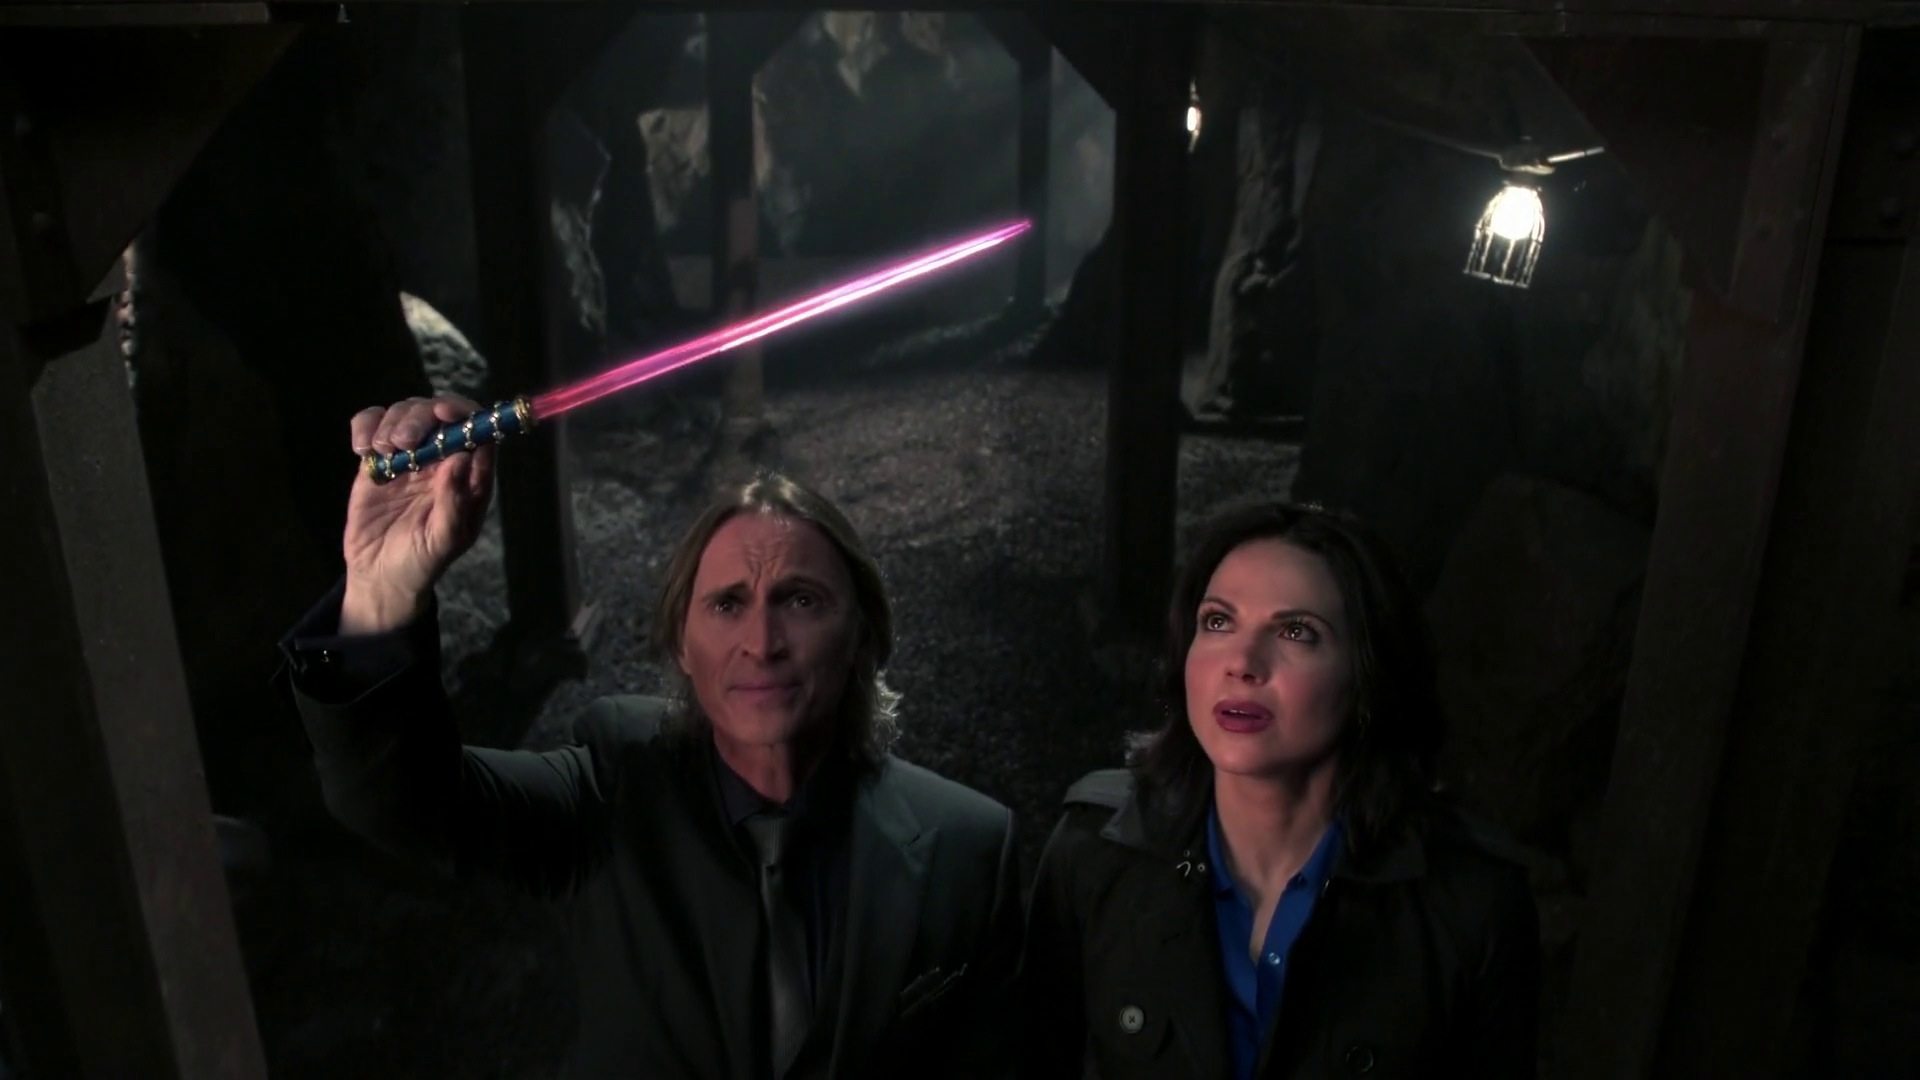 Mr-Gold-and-Regina-with-fairy-wand-Queen-of-Hearts-2x09